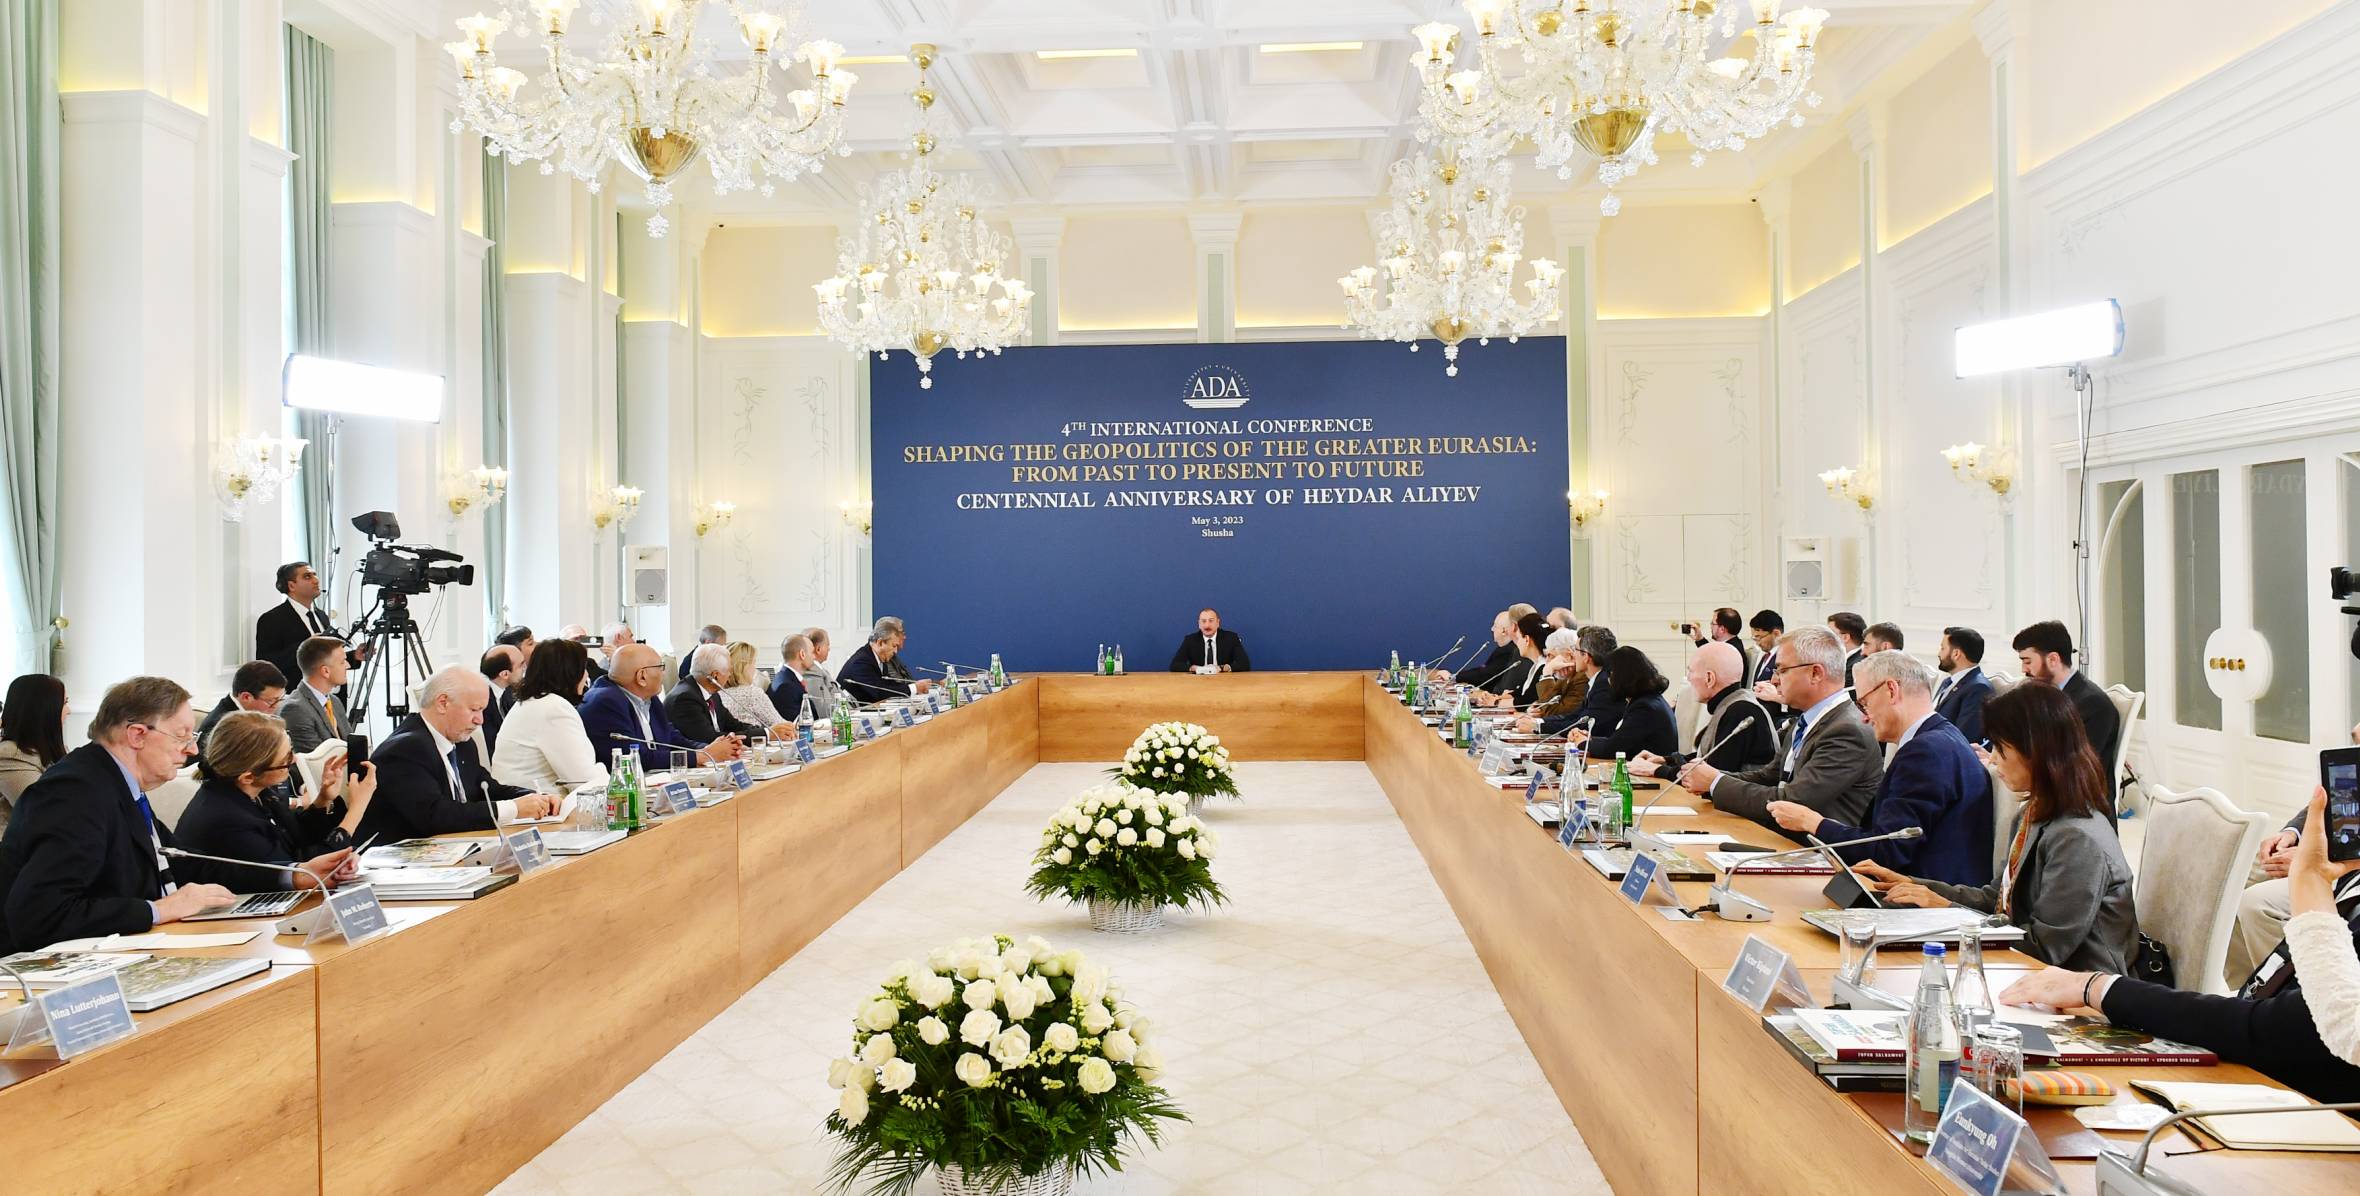 Ilham Aliyev attended international conference on “Shaping the Geopolitics of the Greater Eurasia: from Past to Present to Future” in Shusha